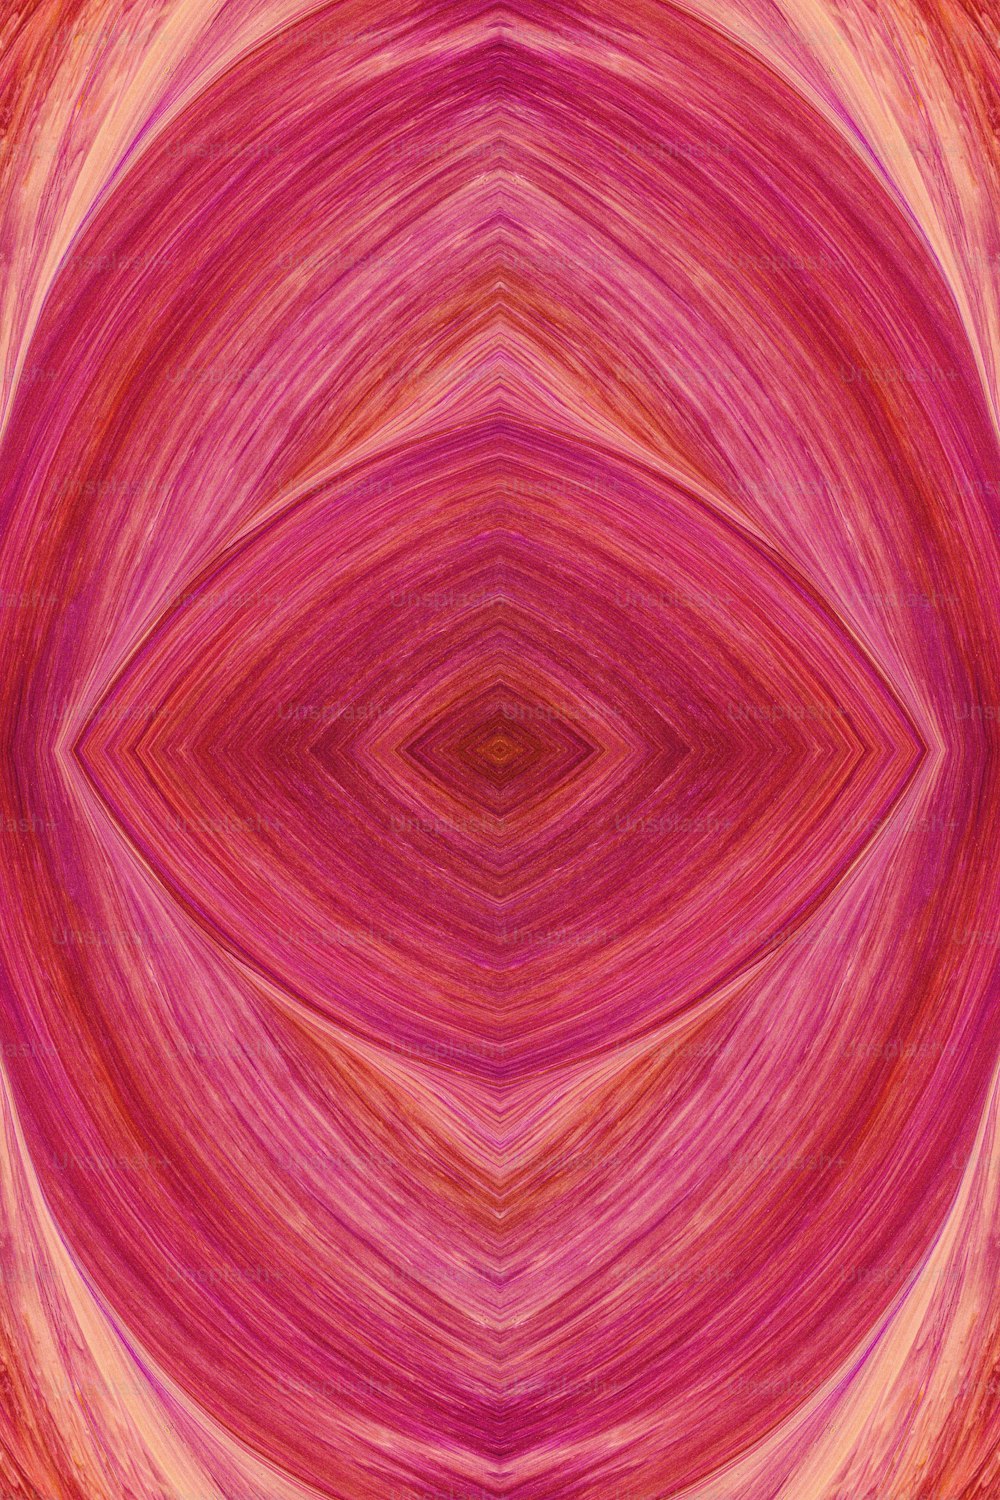 a red and pink abstract background with a circular design